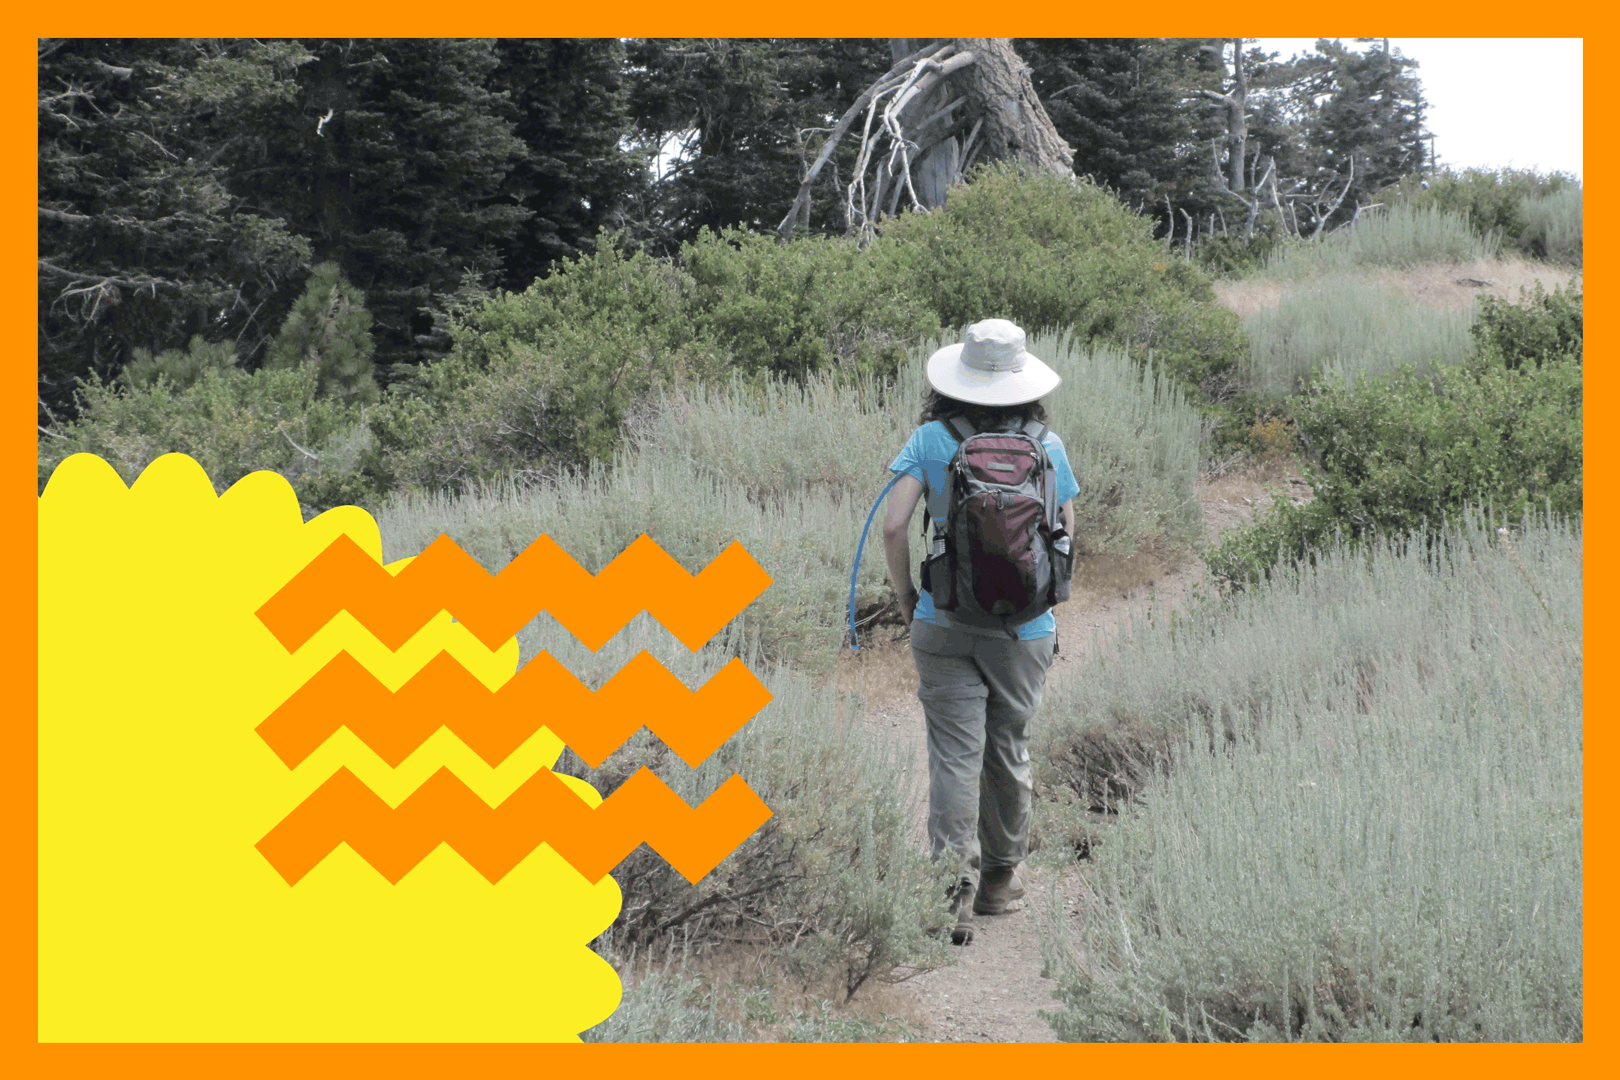 A day hiker on the Pacific Crest Trail near Wrightwood